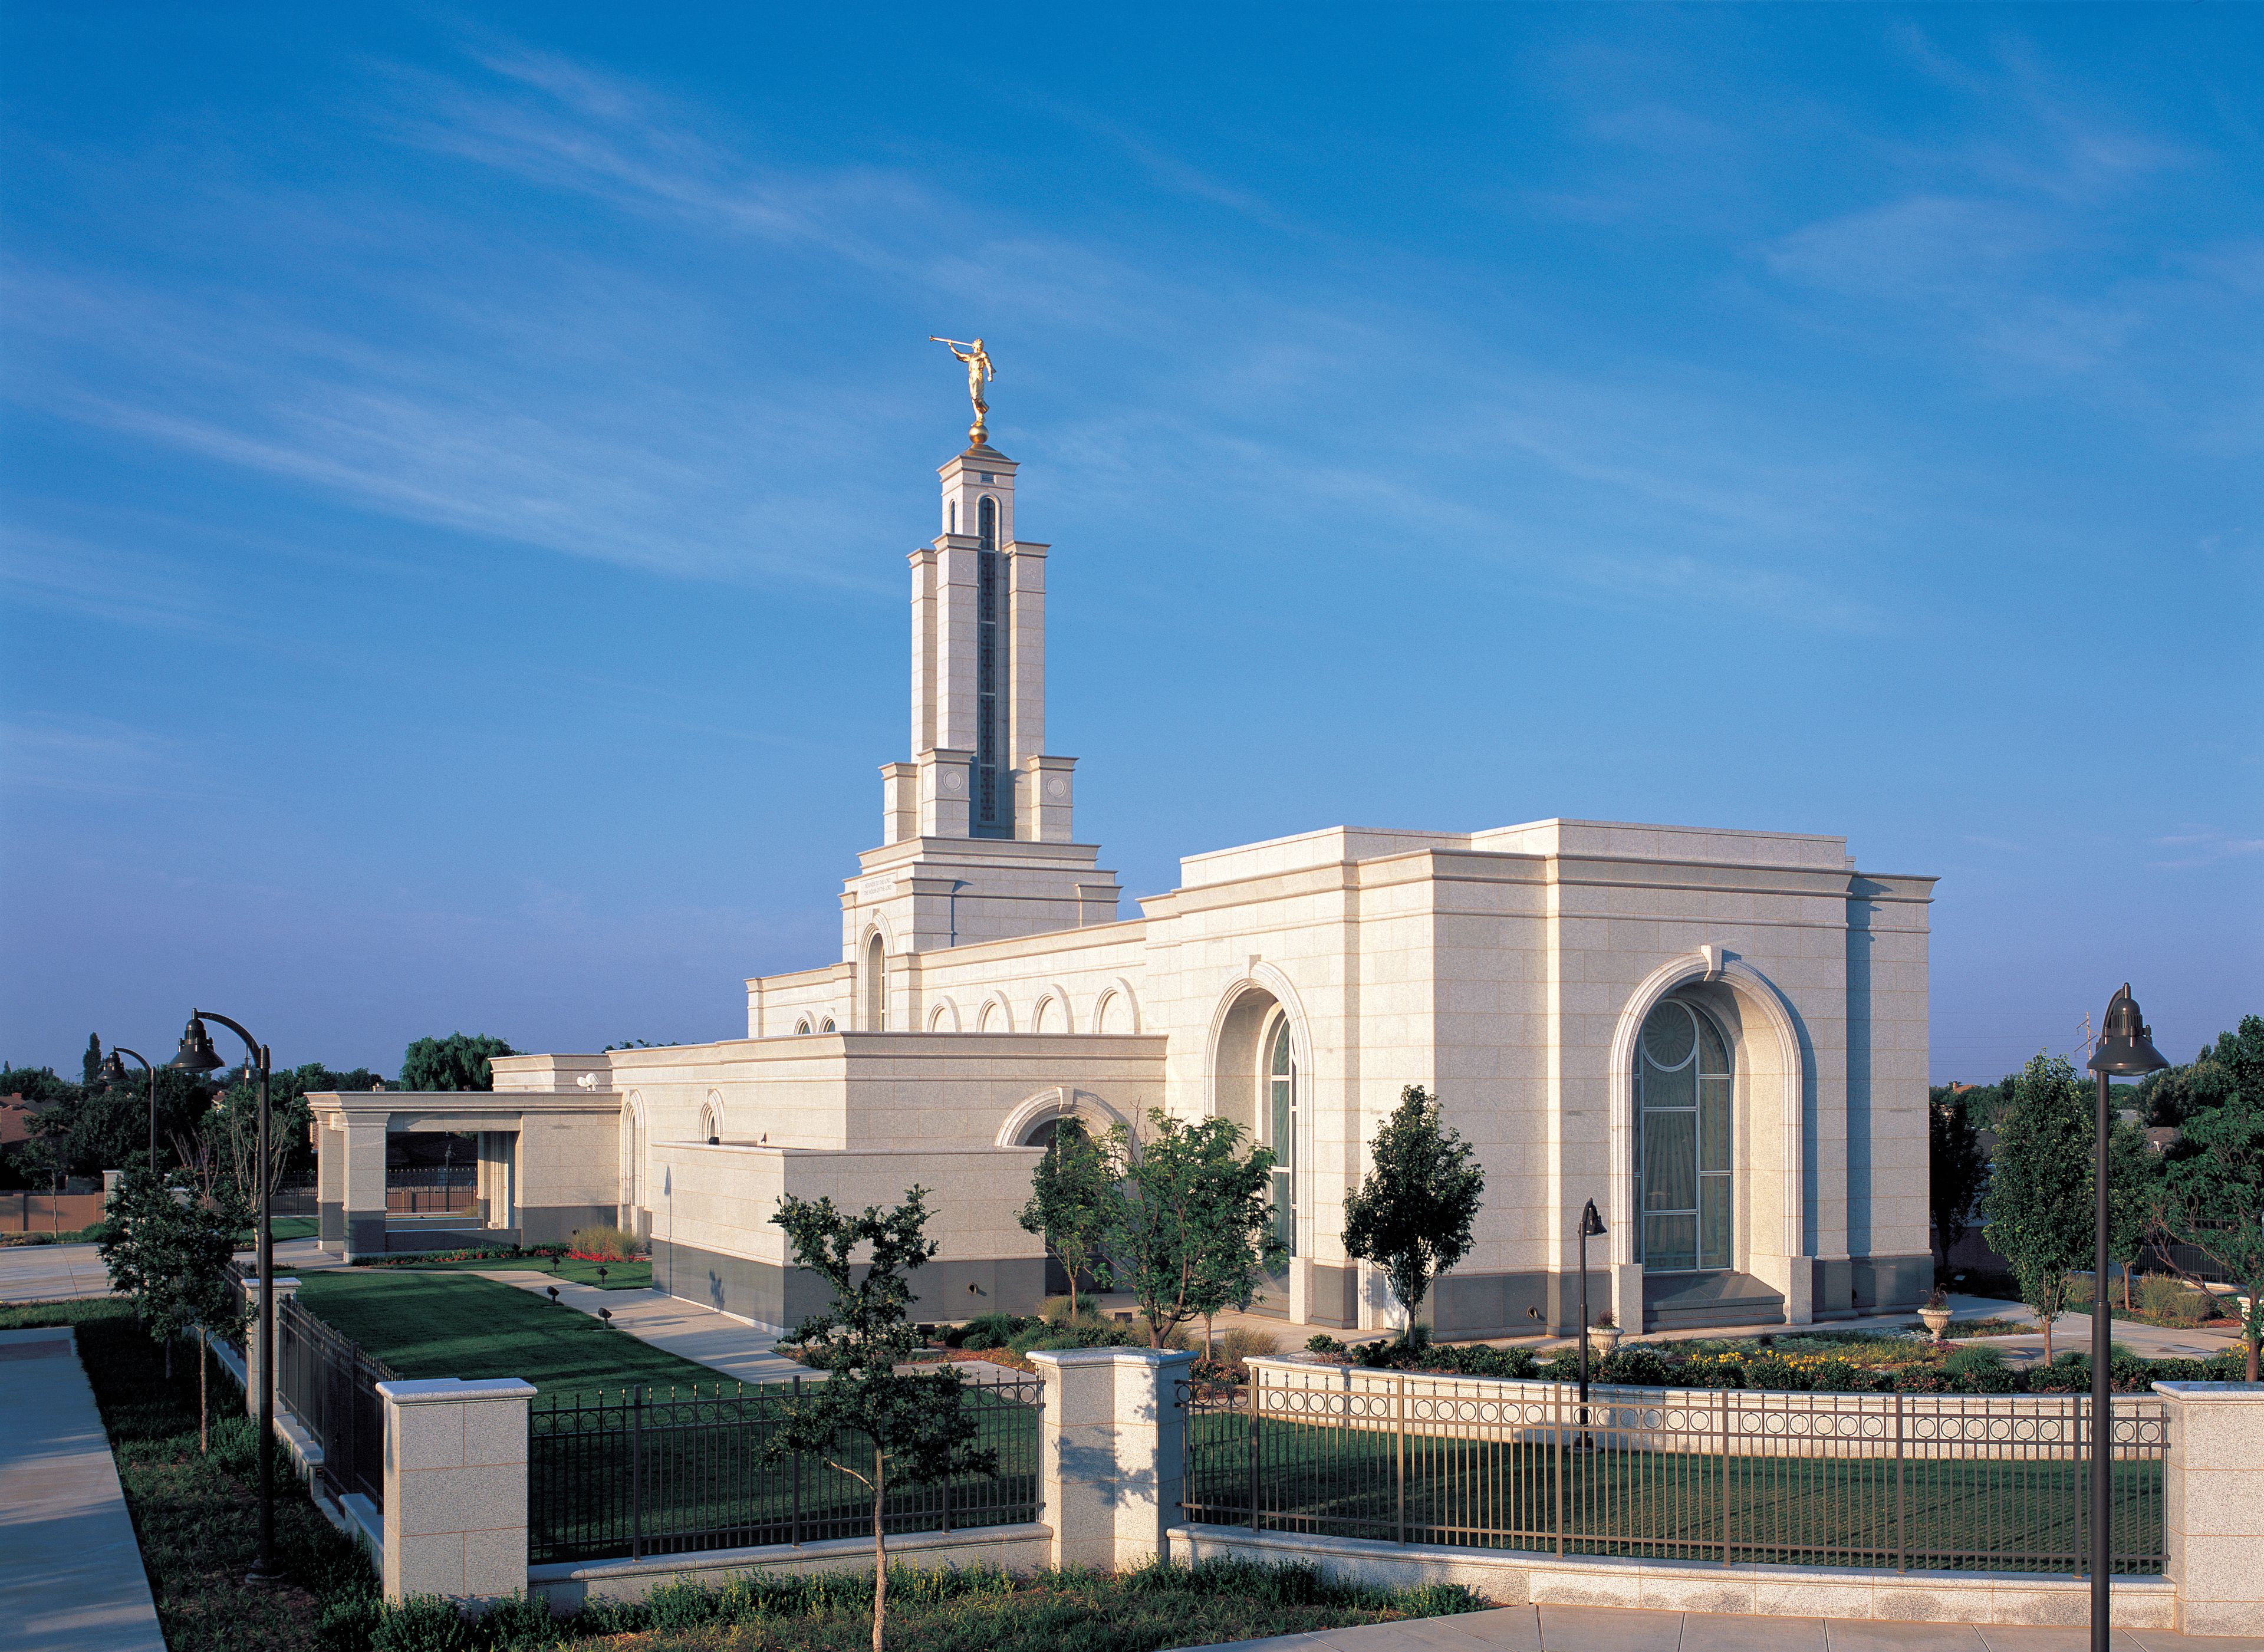 One side of the Lubbock Texas Temple on a sunny day.